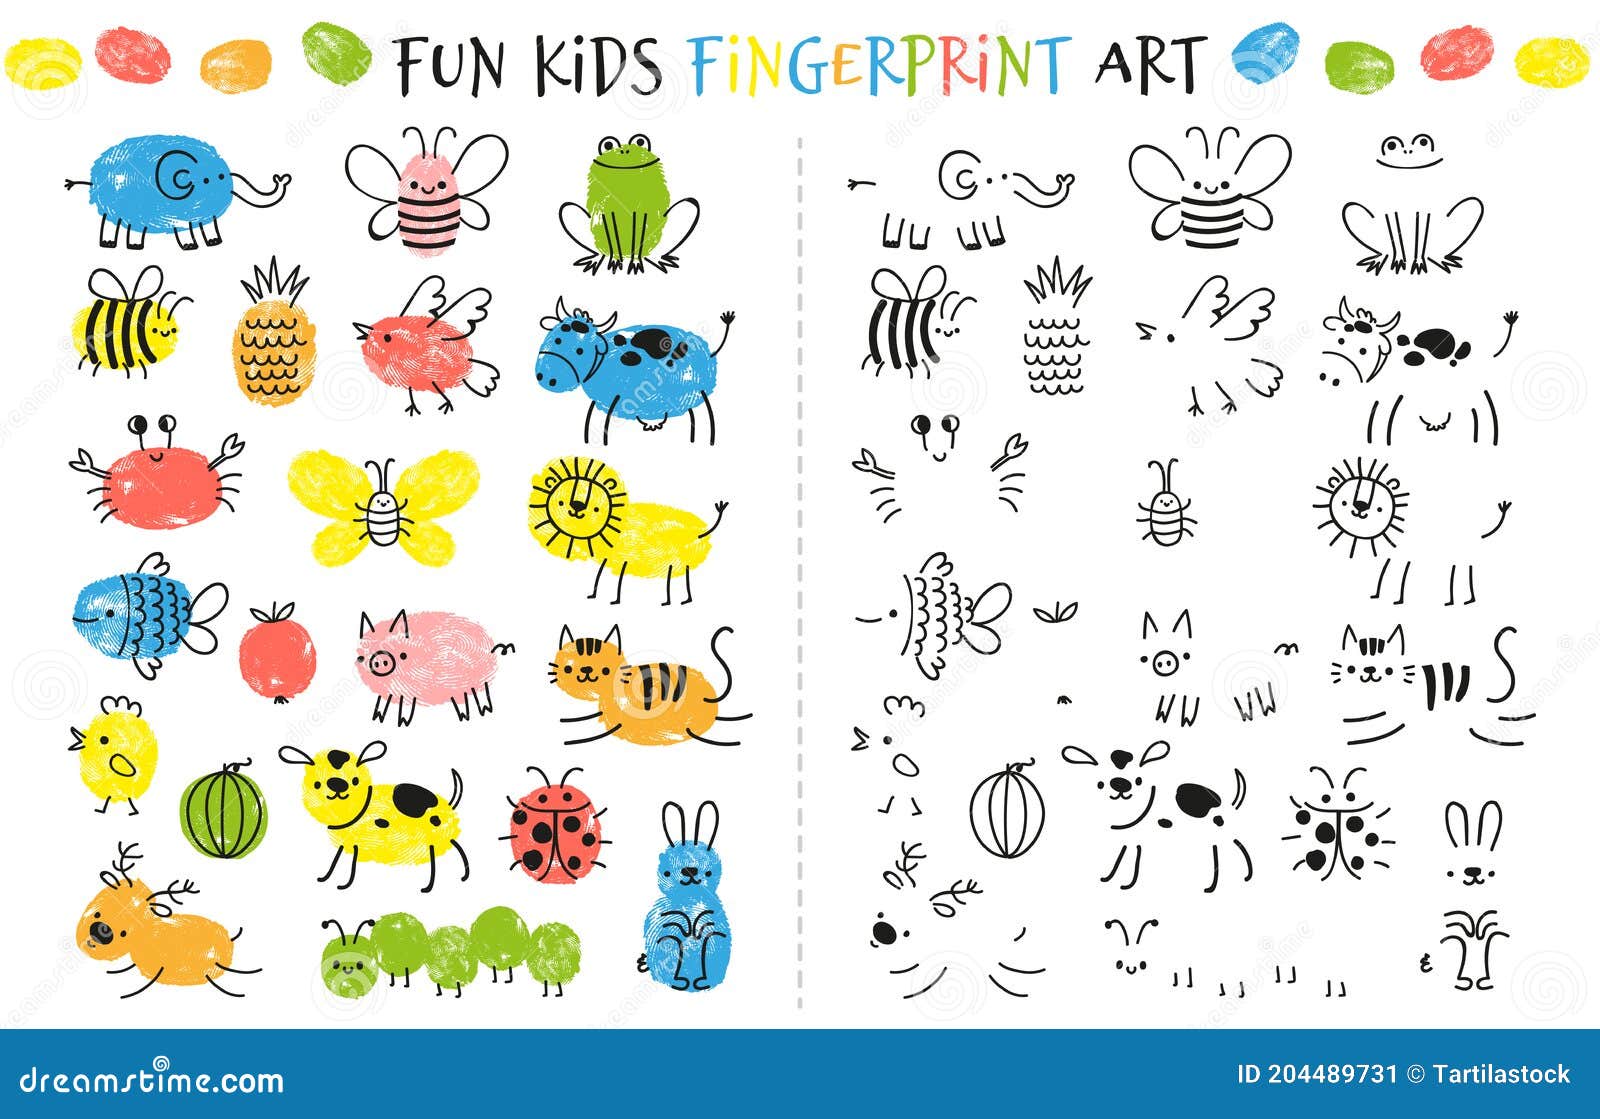 https://thumbs.dreamstime.com/z/fingerprint-game-kids-fun-educational-activity-children-study-to-paint-fingers-doodle-animals-insects-drawing-vector-204489731.jpg